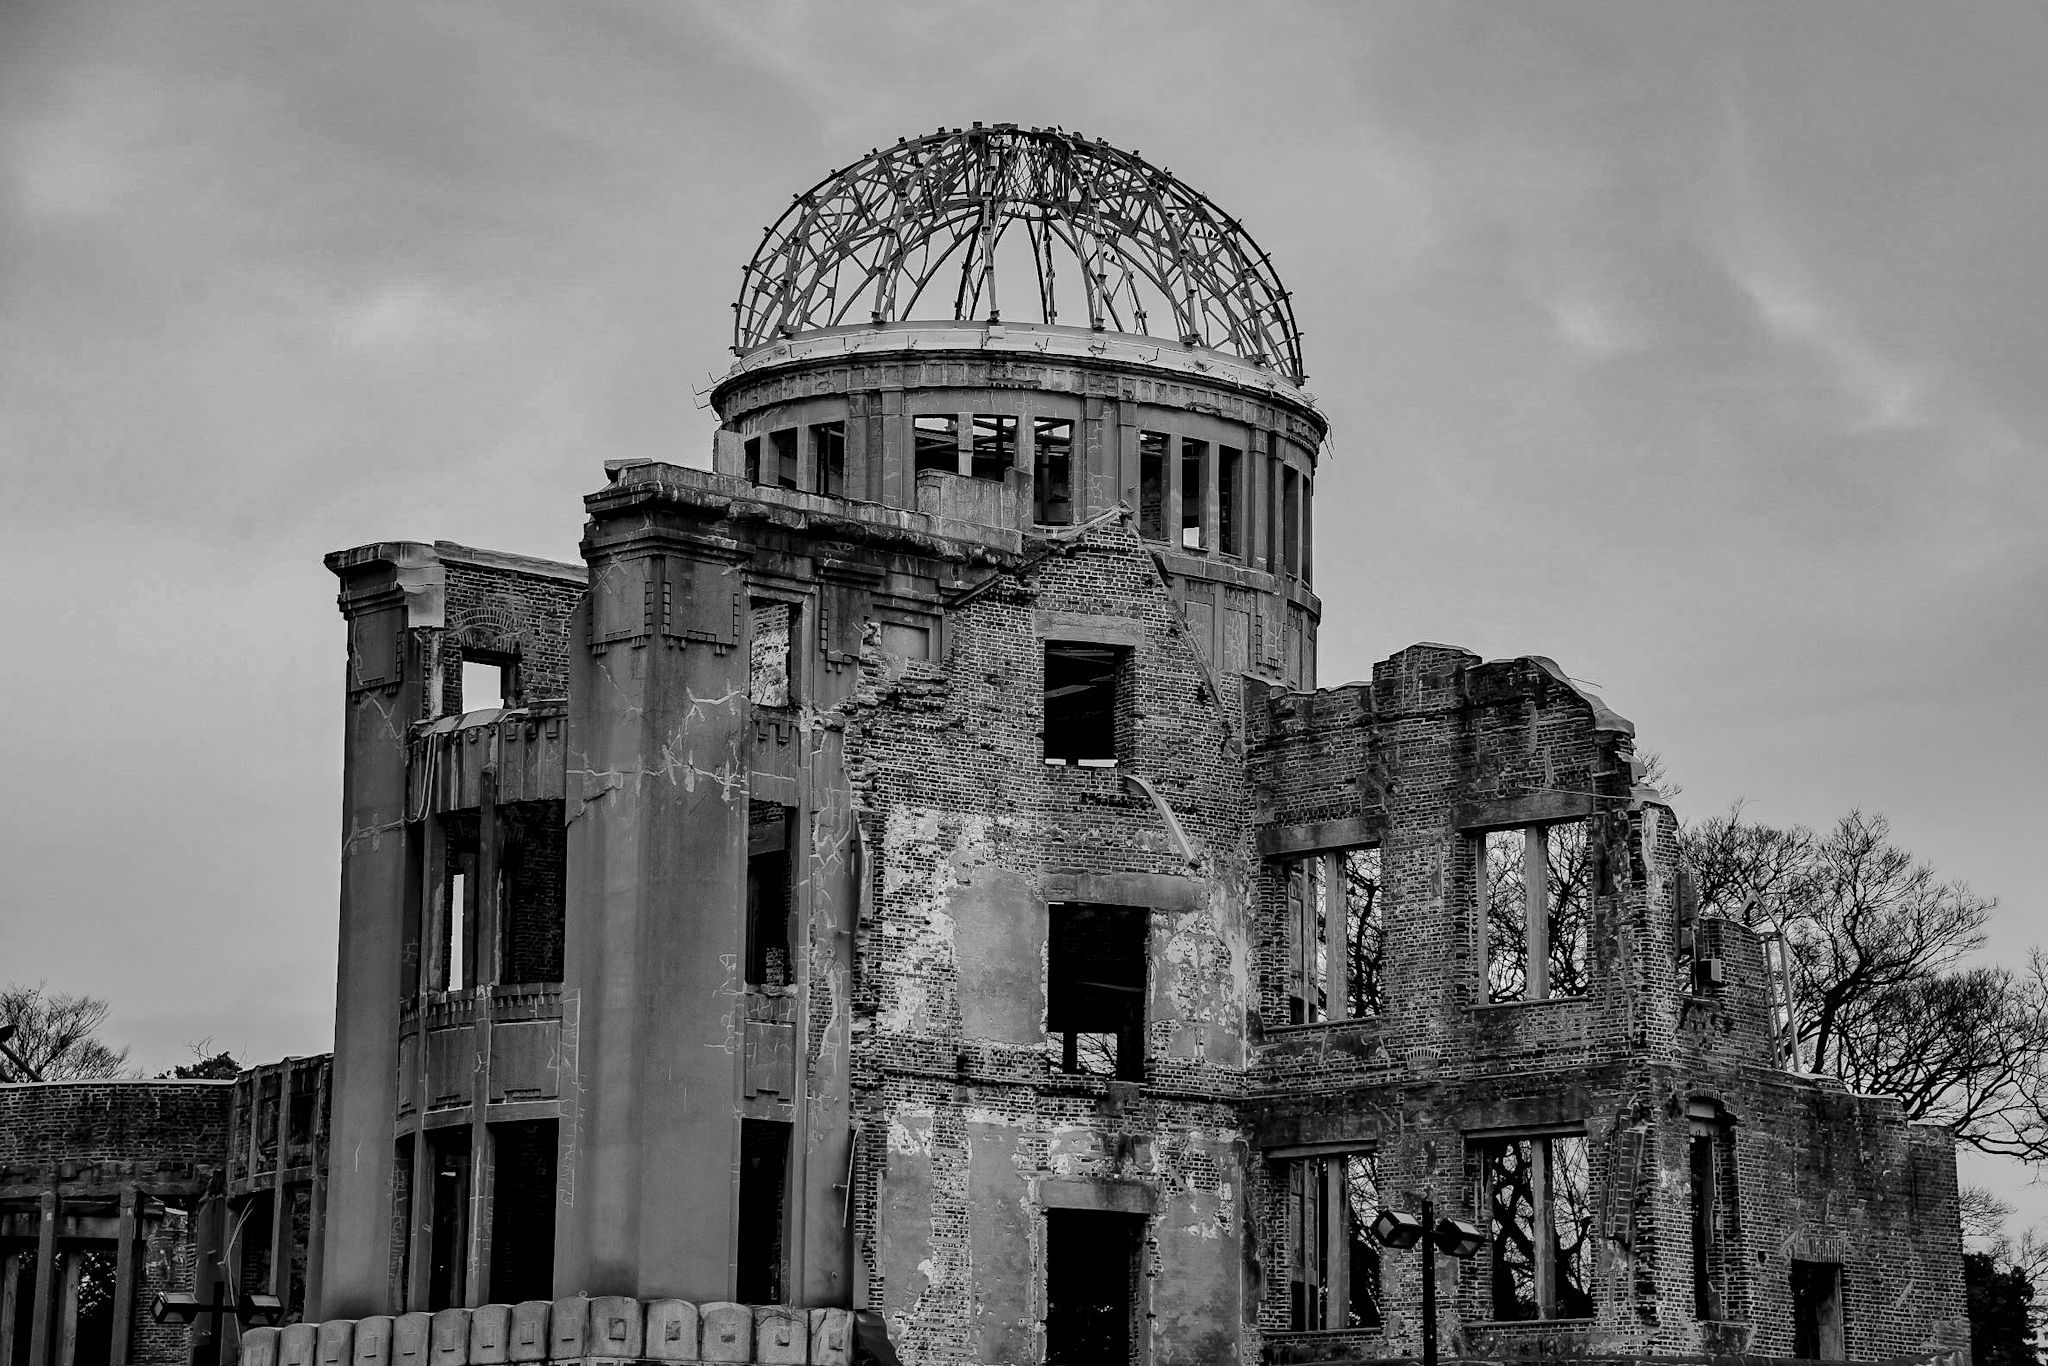 August 6th, 1945, the city known as Hiroshima was bathed in atomic fire in an attempt to end world war 2. As a result, over 120,000 civilians were killed in what is known as one of the most catastrophic events in history.